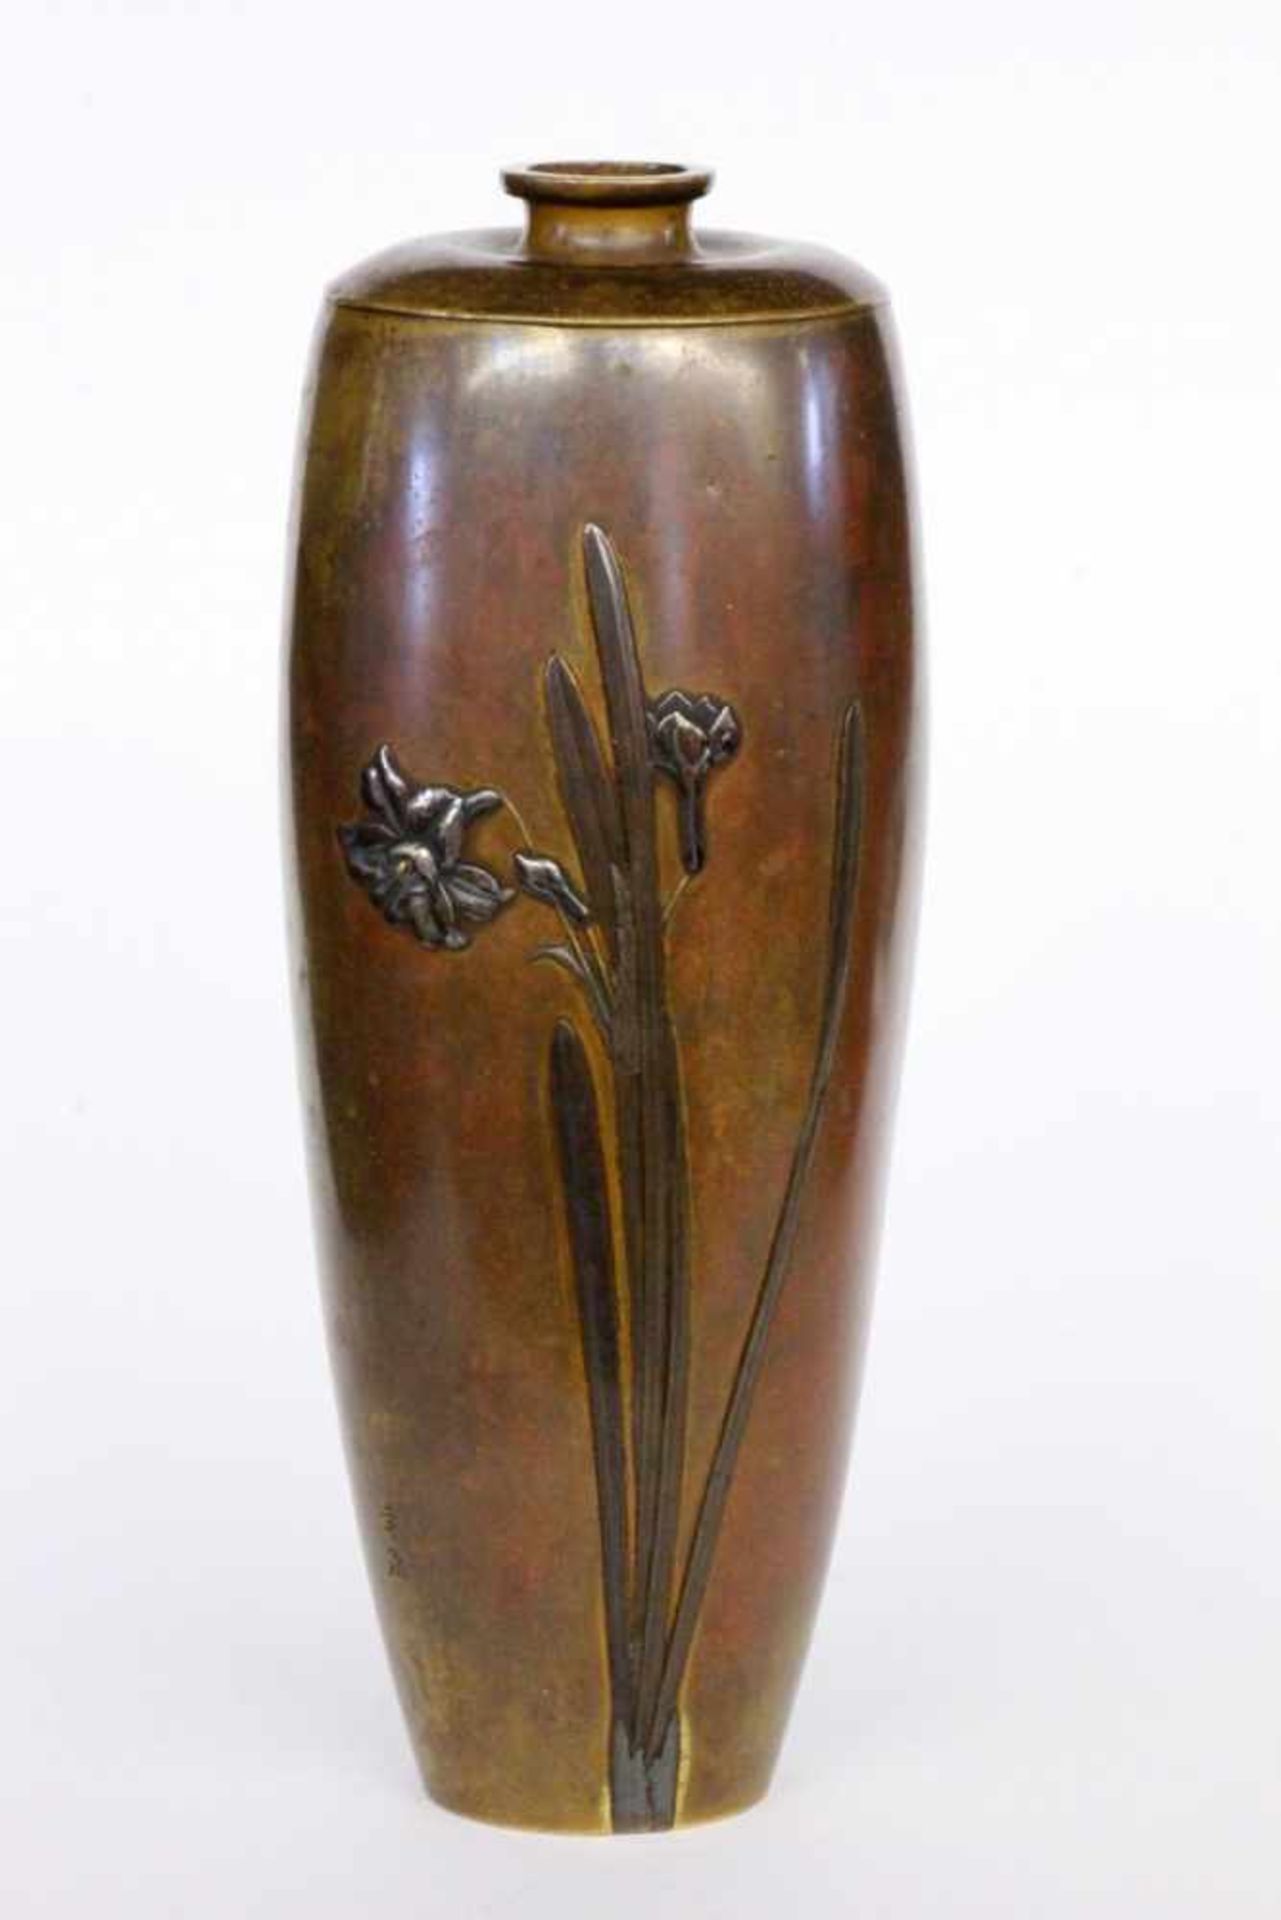 A VASE Japan. Meiji period Bronze with lily decoration in relief. Seal mark: Inoue. 22.5cm high.